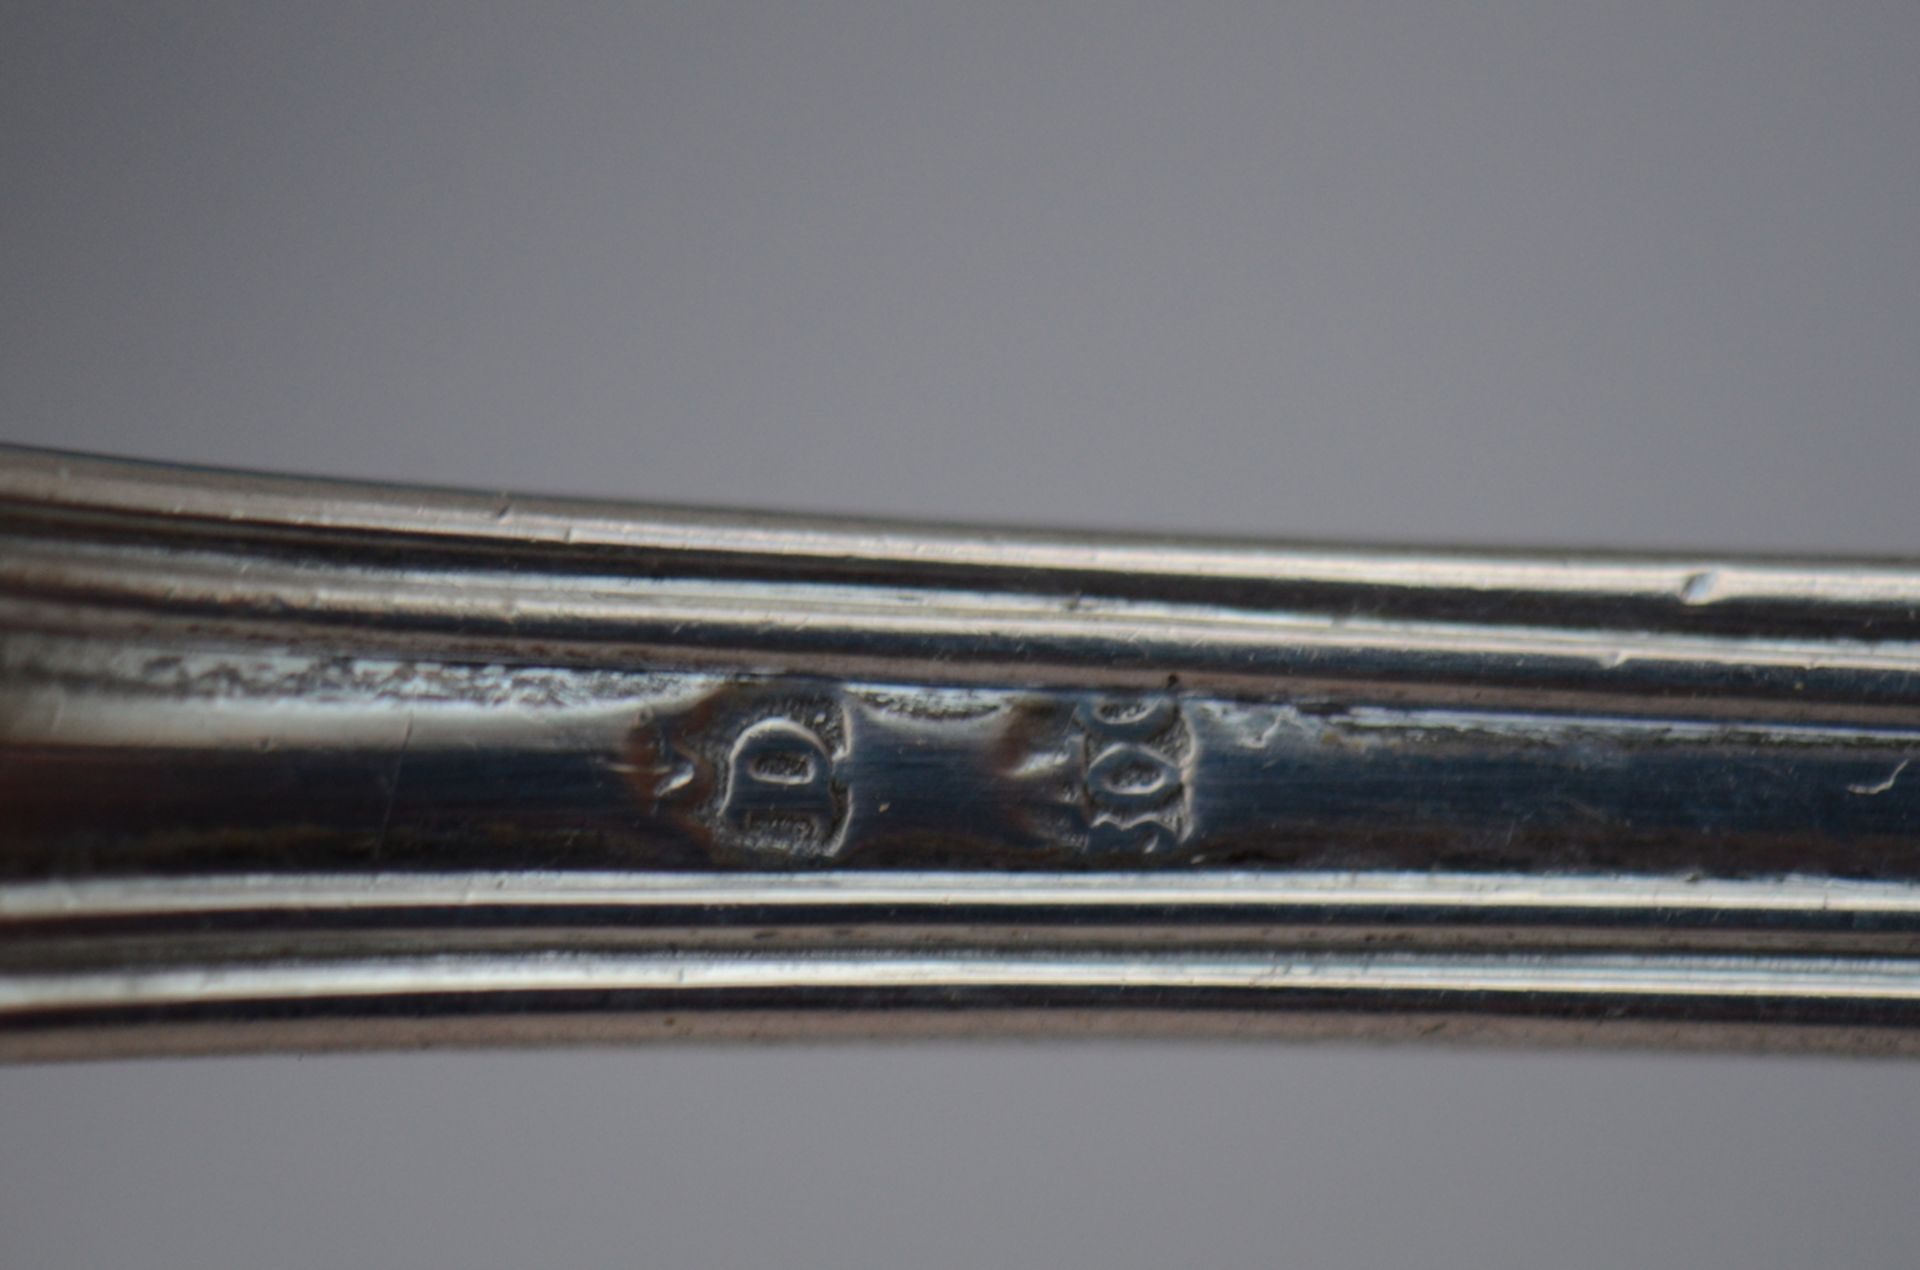 Two different ecrins with silver cutlery, ecrin birth gift, part of a silver menagere in gilt - Image 5 of 5